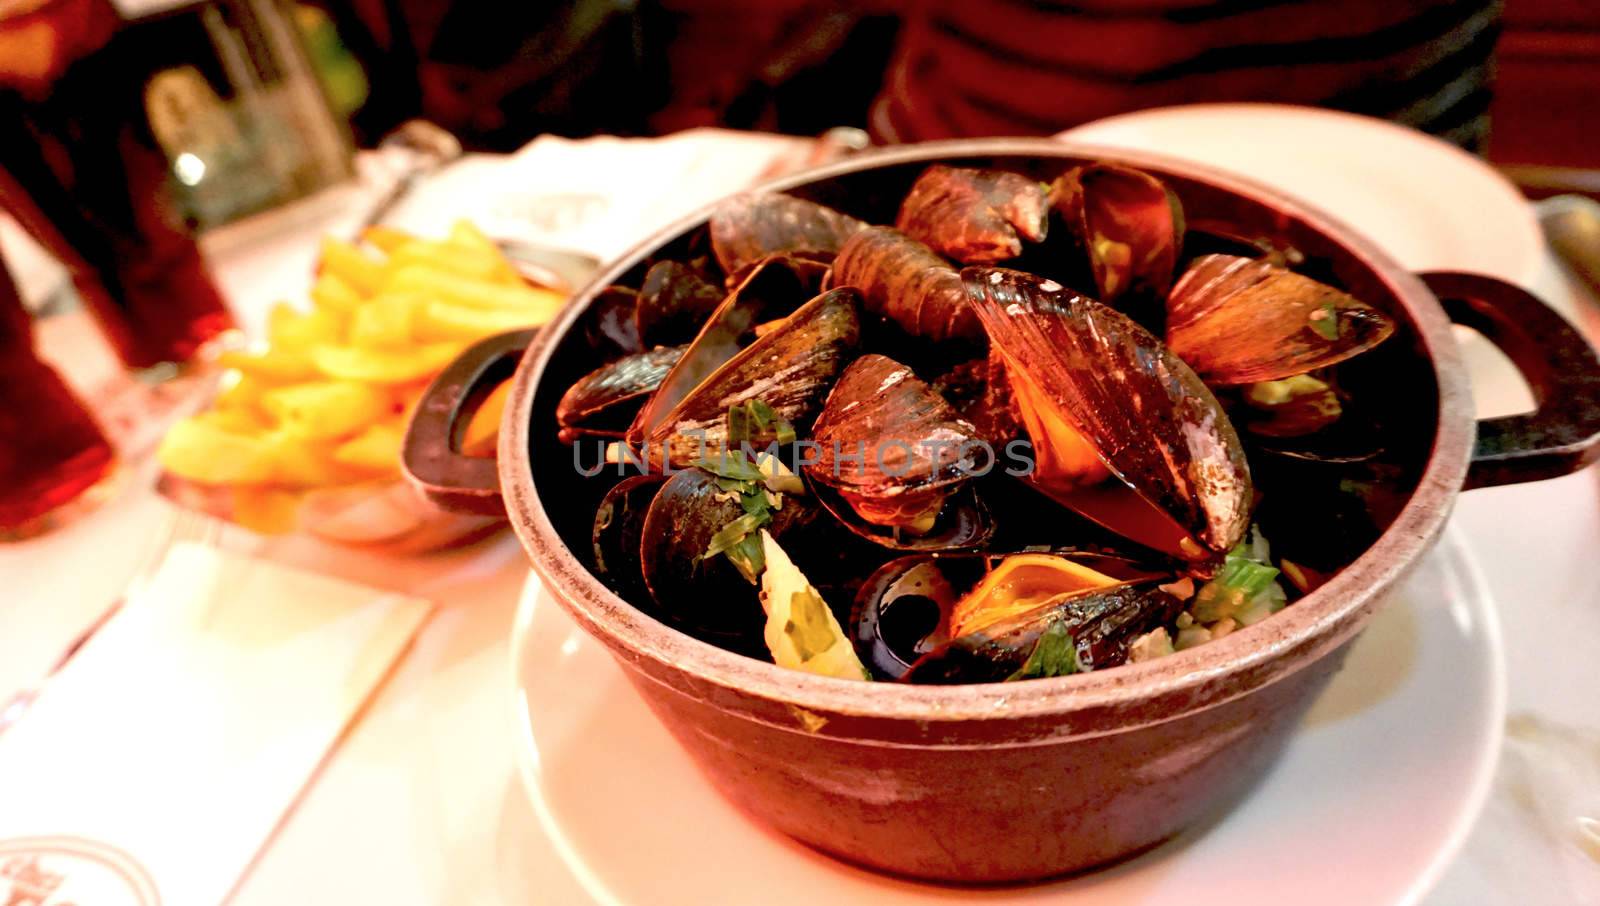 baked mussels with white wine with frenchfried in belgium